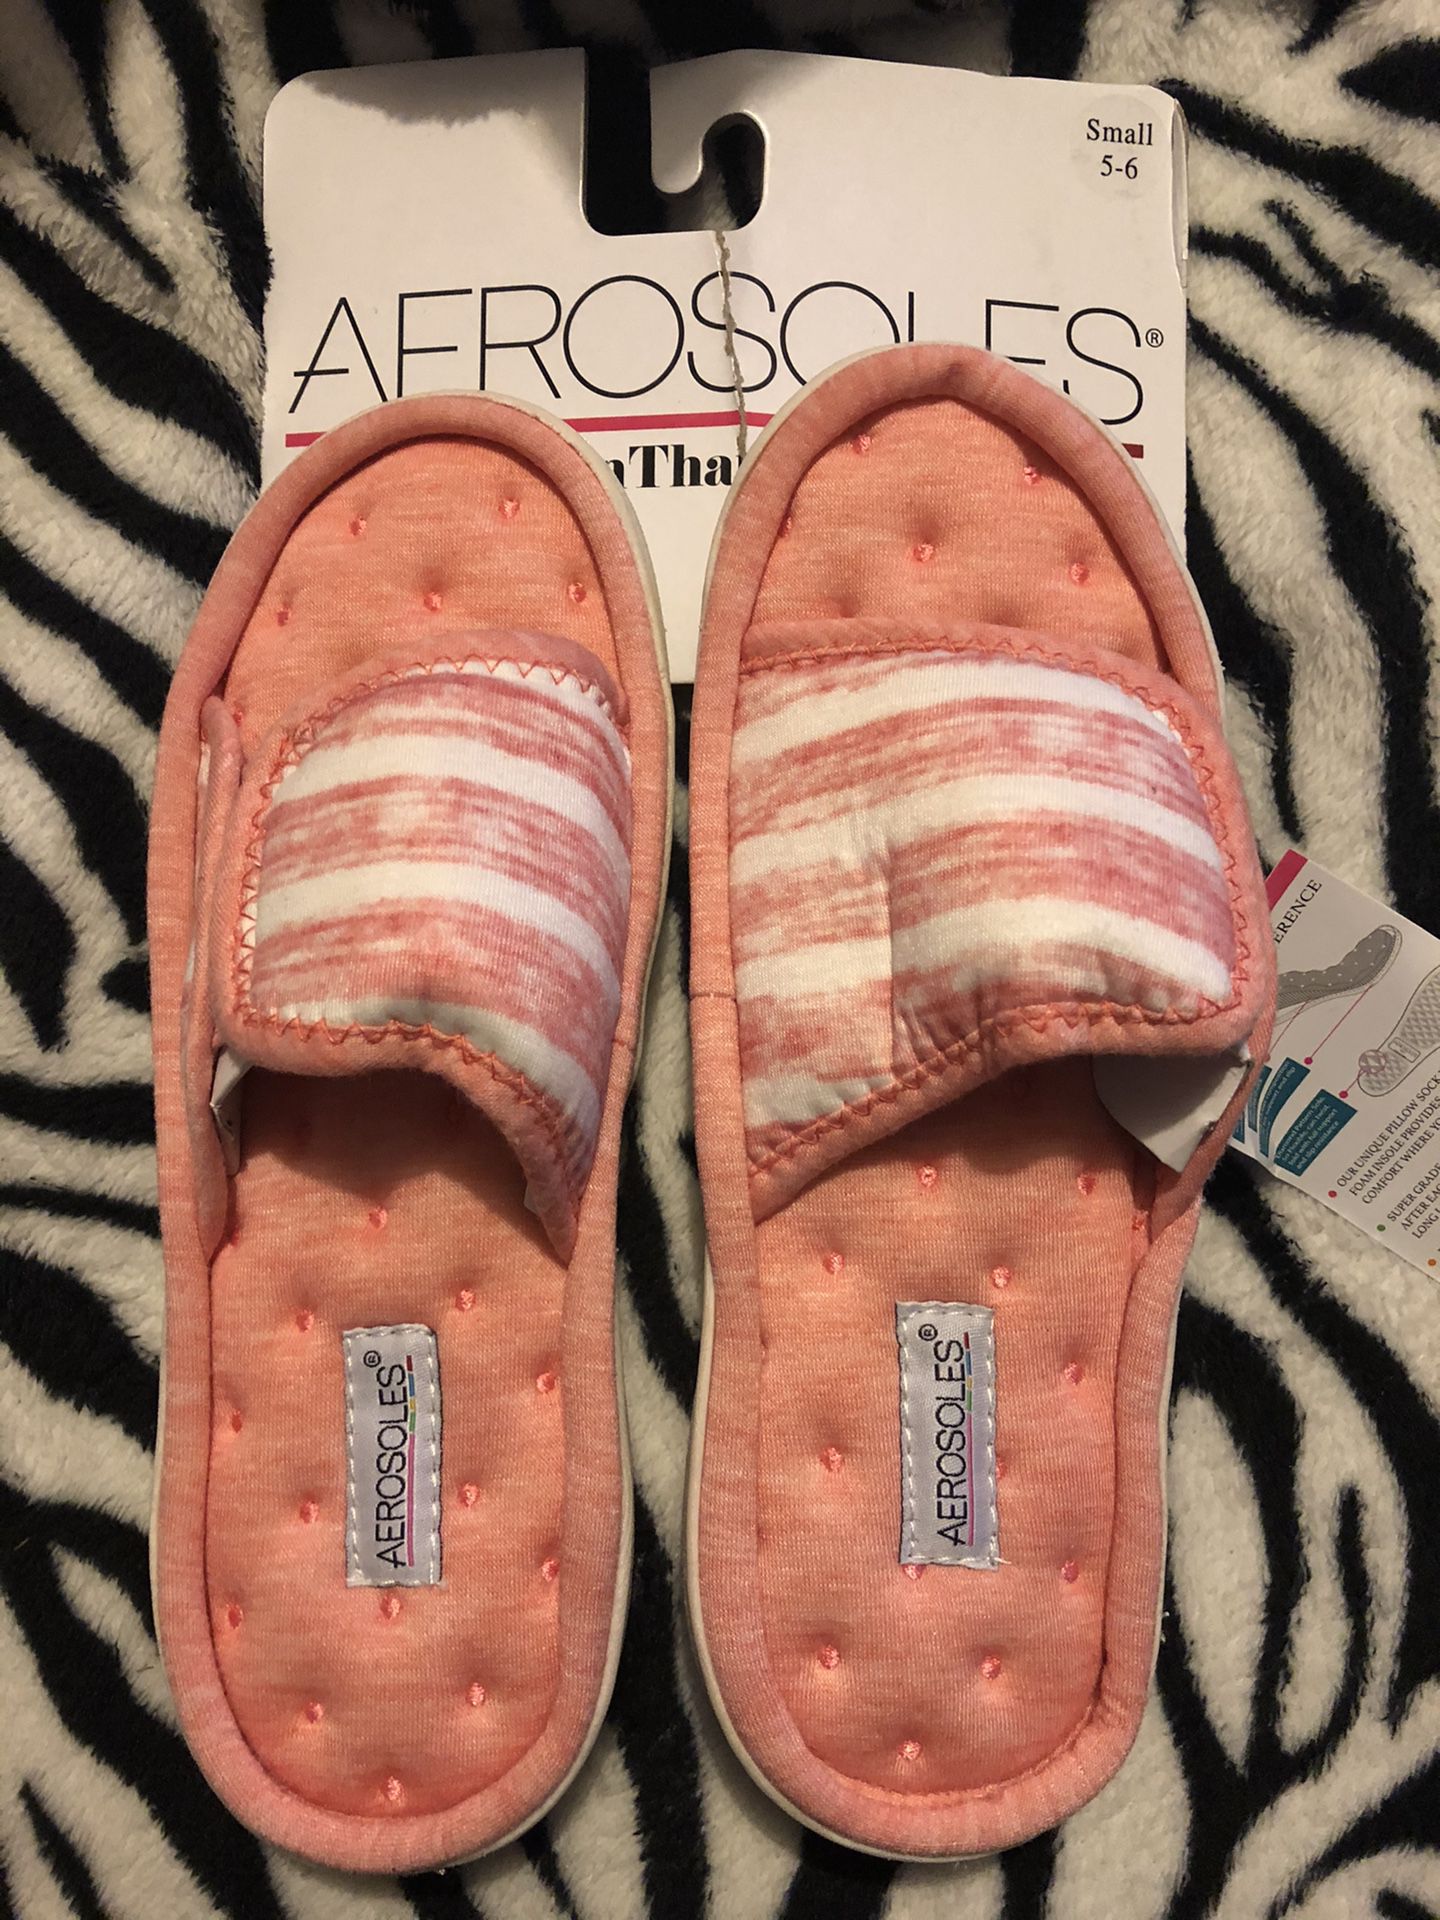 Women Slippers Aerosoles NWT Sz small-xlg for in Victorville, - OfferUp